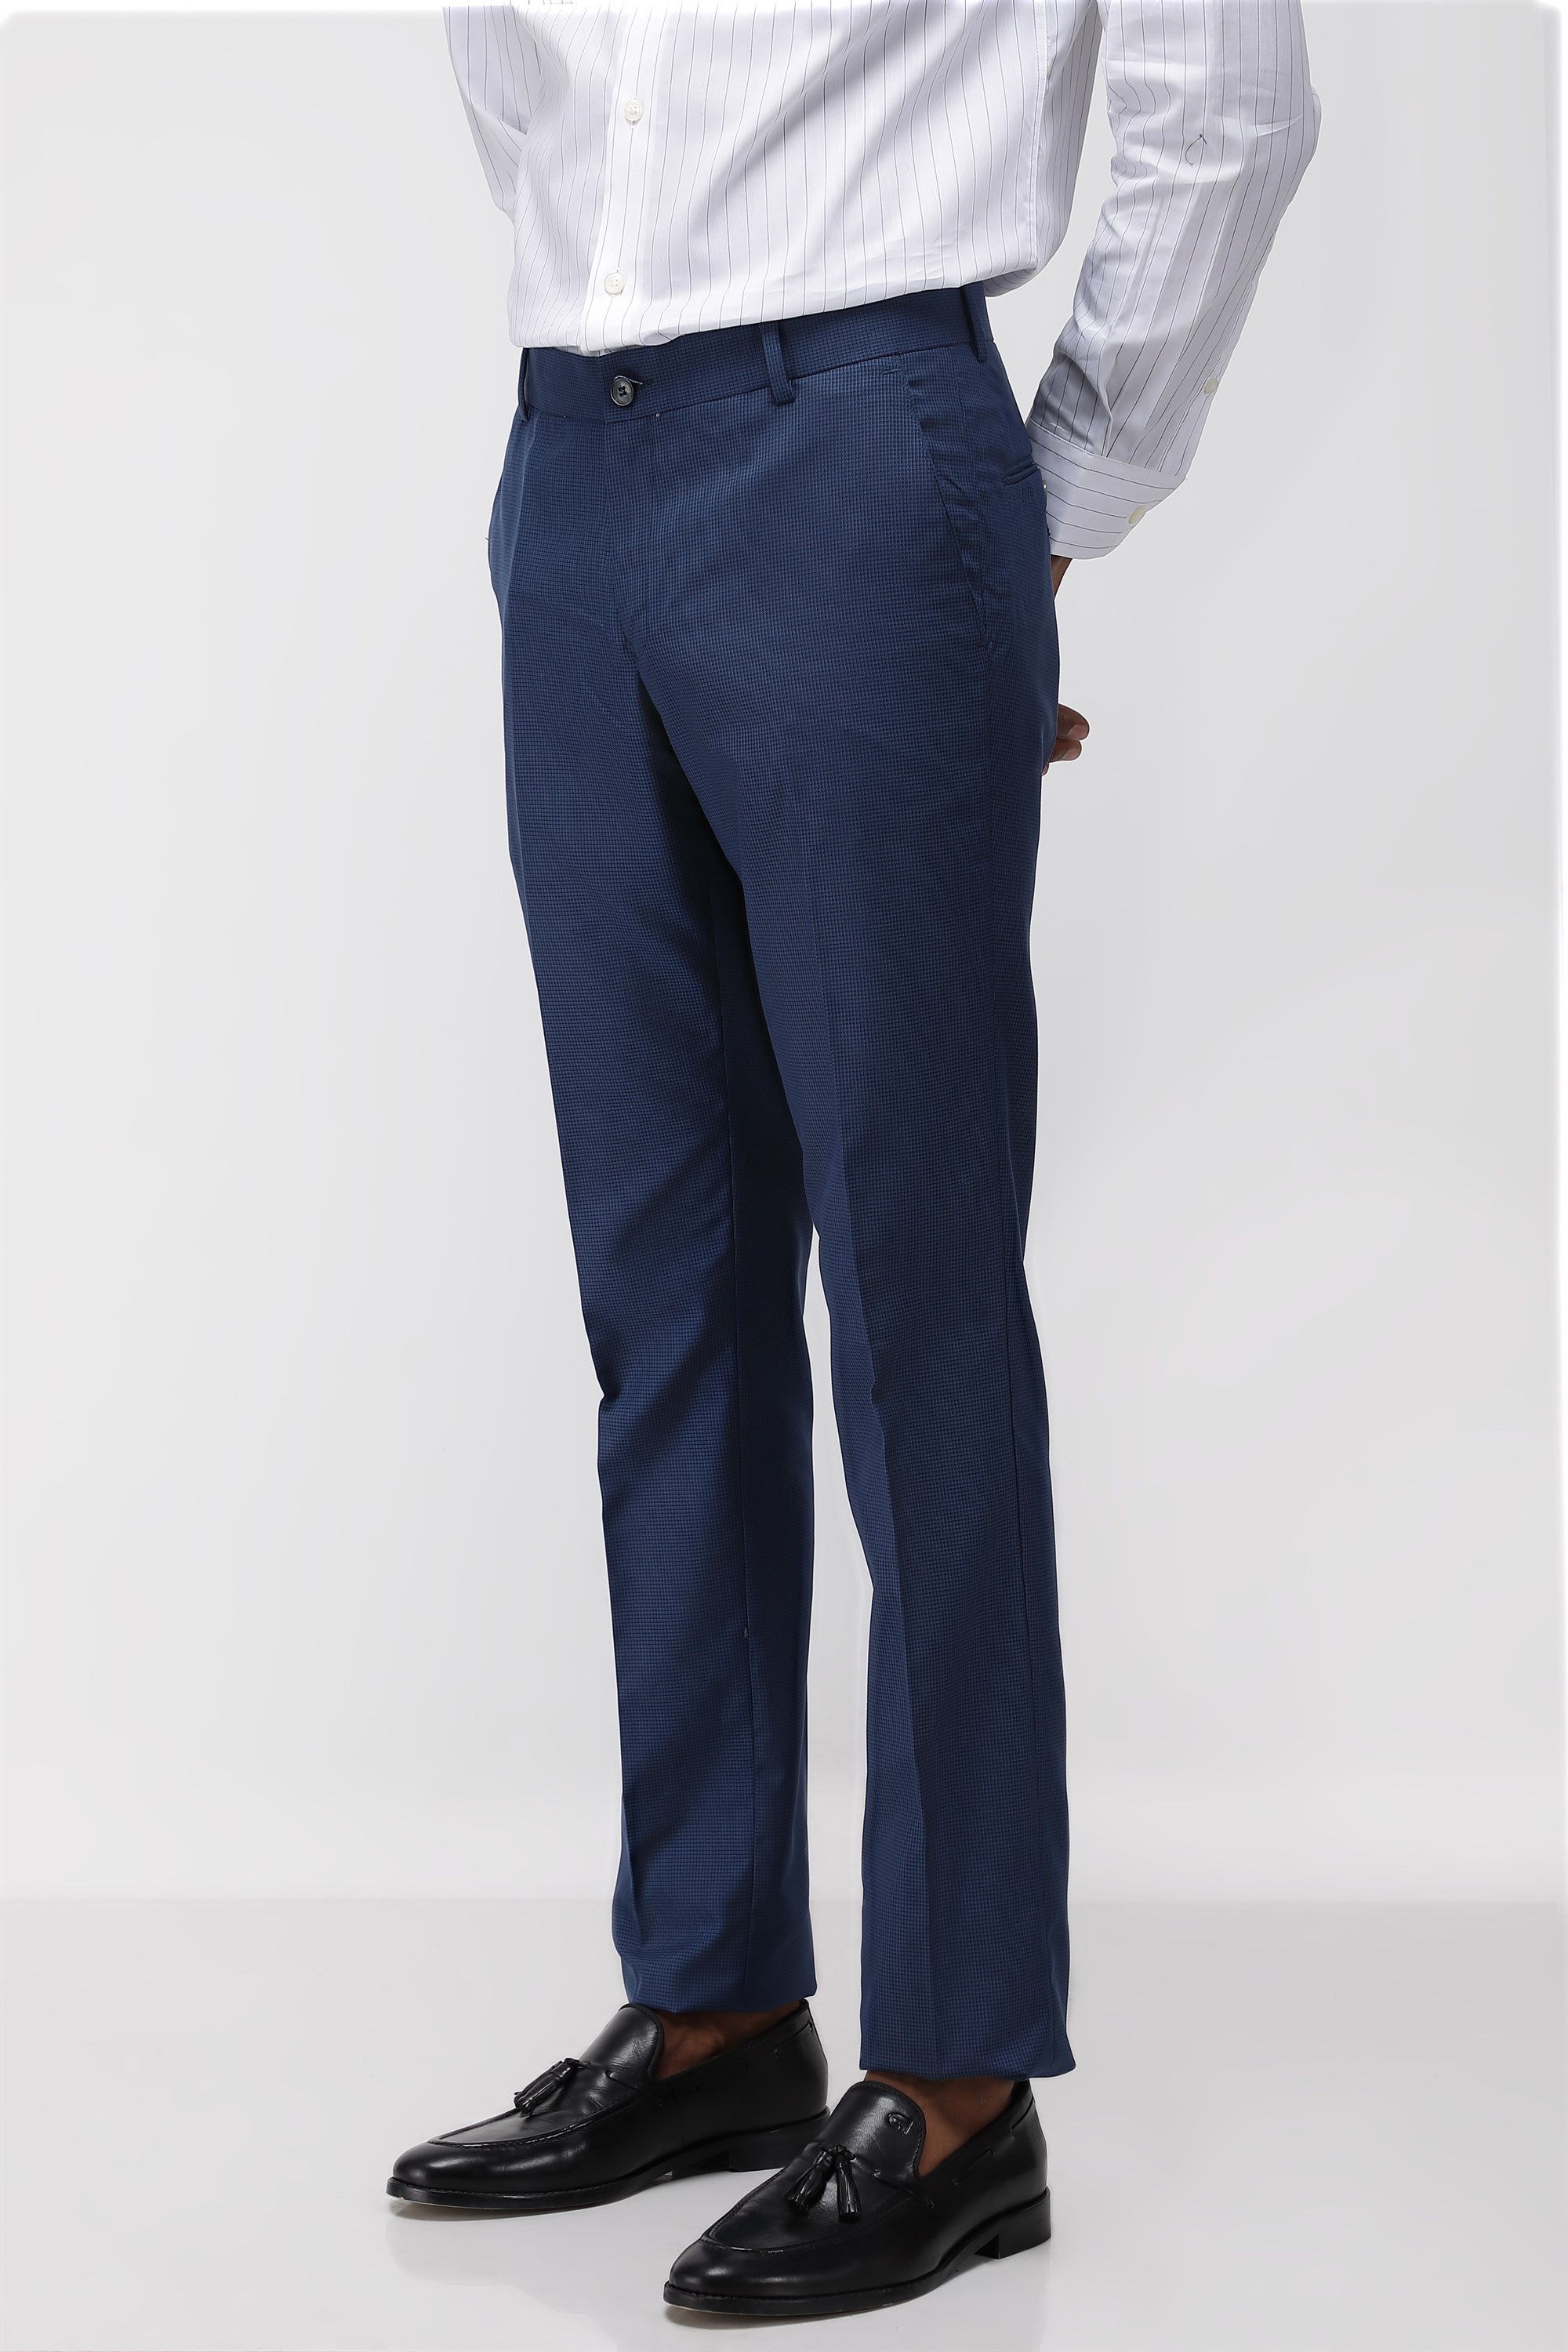 2023 Fashion Mens Dark Stripe Formal Office Pants With Belt Design Simple  Slim Business Casual Suit Office Pants In Plus Size 38 230307 From Mu01,  $23.17 | DHgate.Com